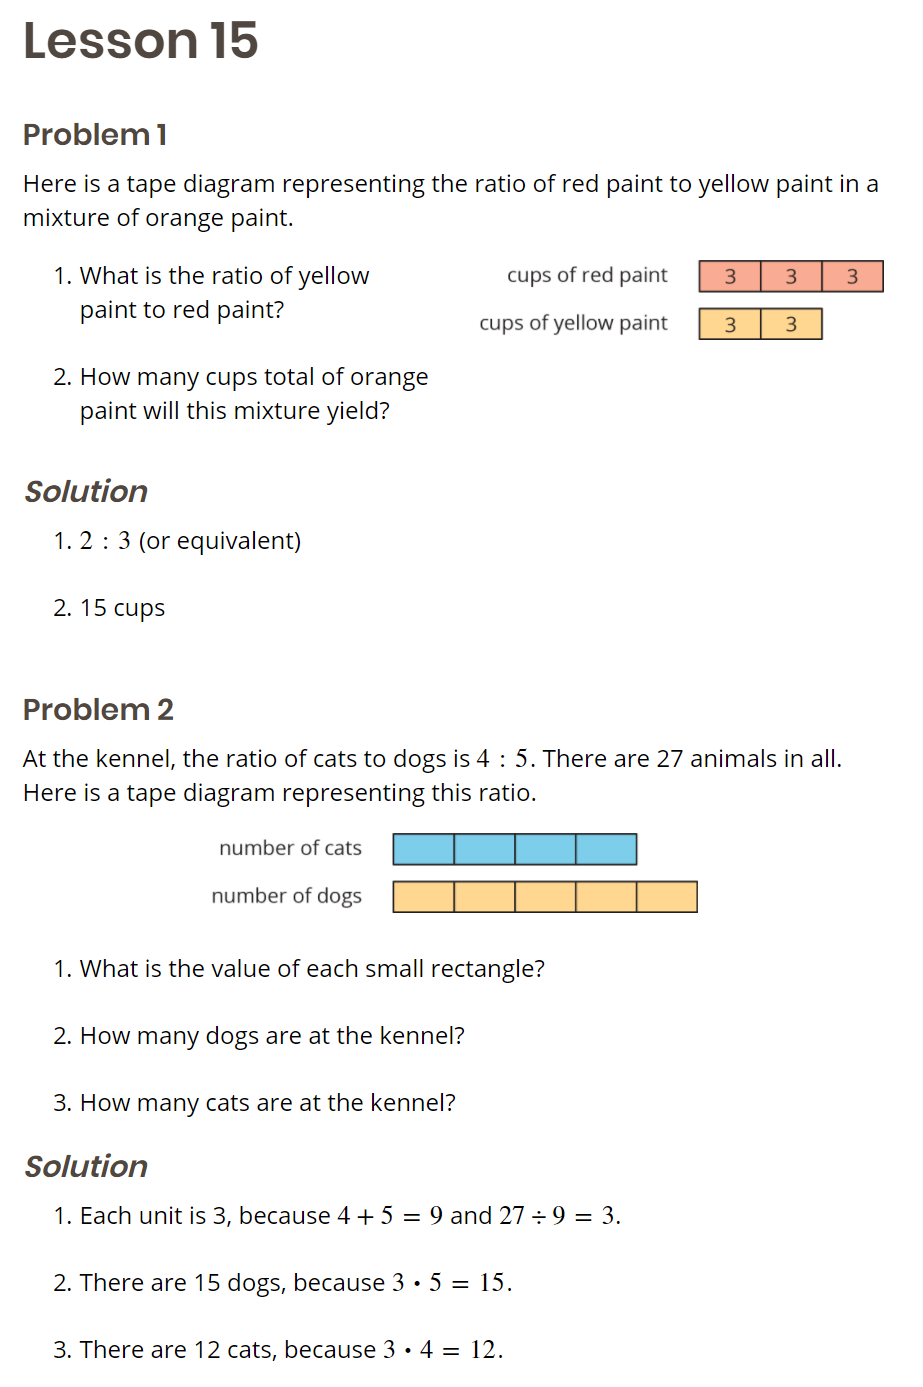 Lesson 1 generating equivalent expressions problem set answer key students how to get